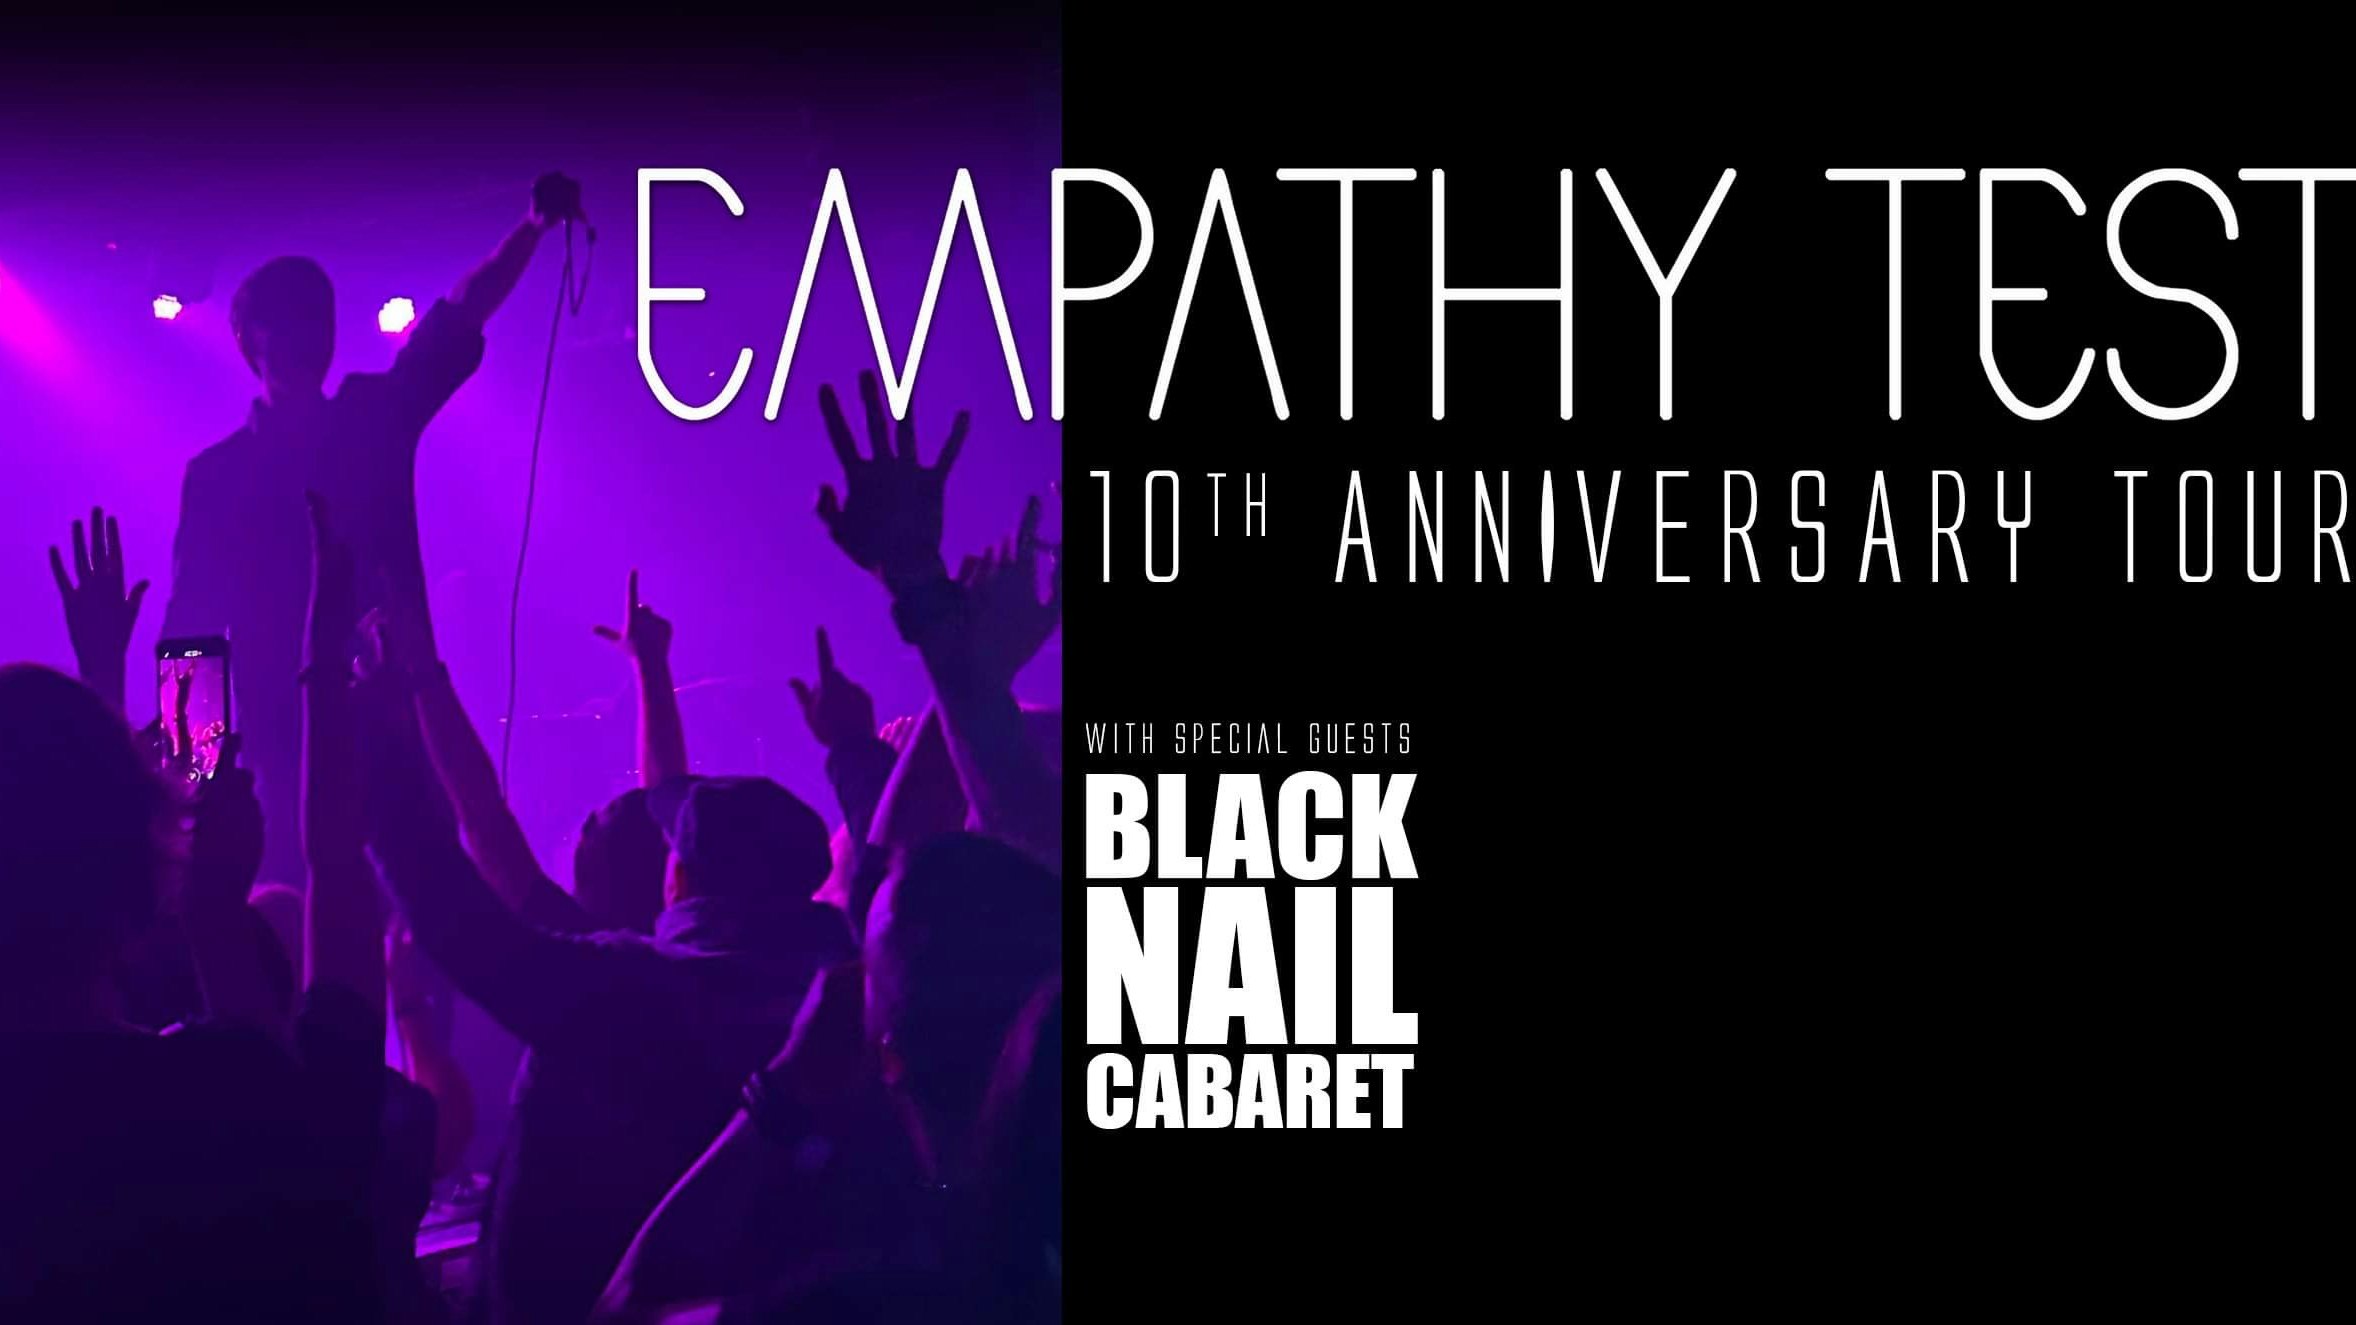 EMPATHY TEST 10th ANNIVERSARY UK TOUR with Special Guests BLACK NAIL CABARET